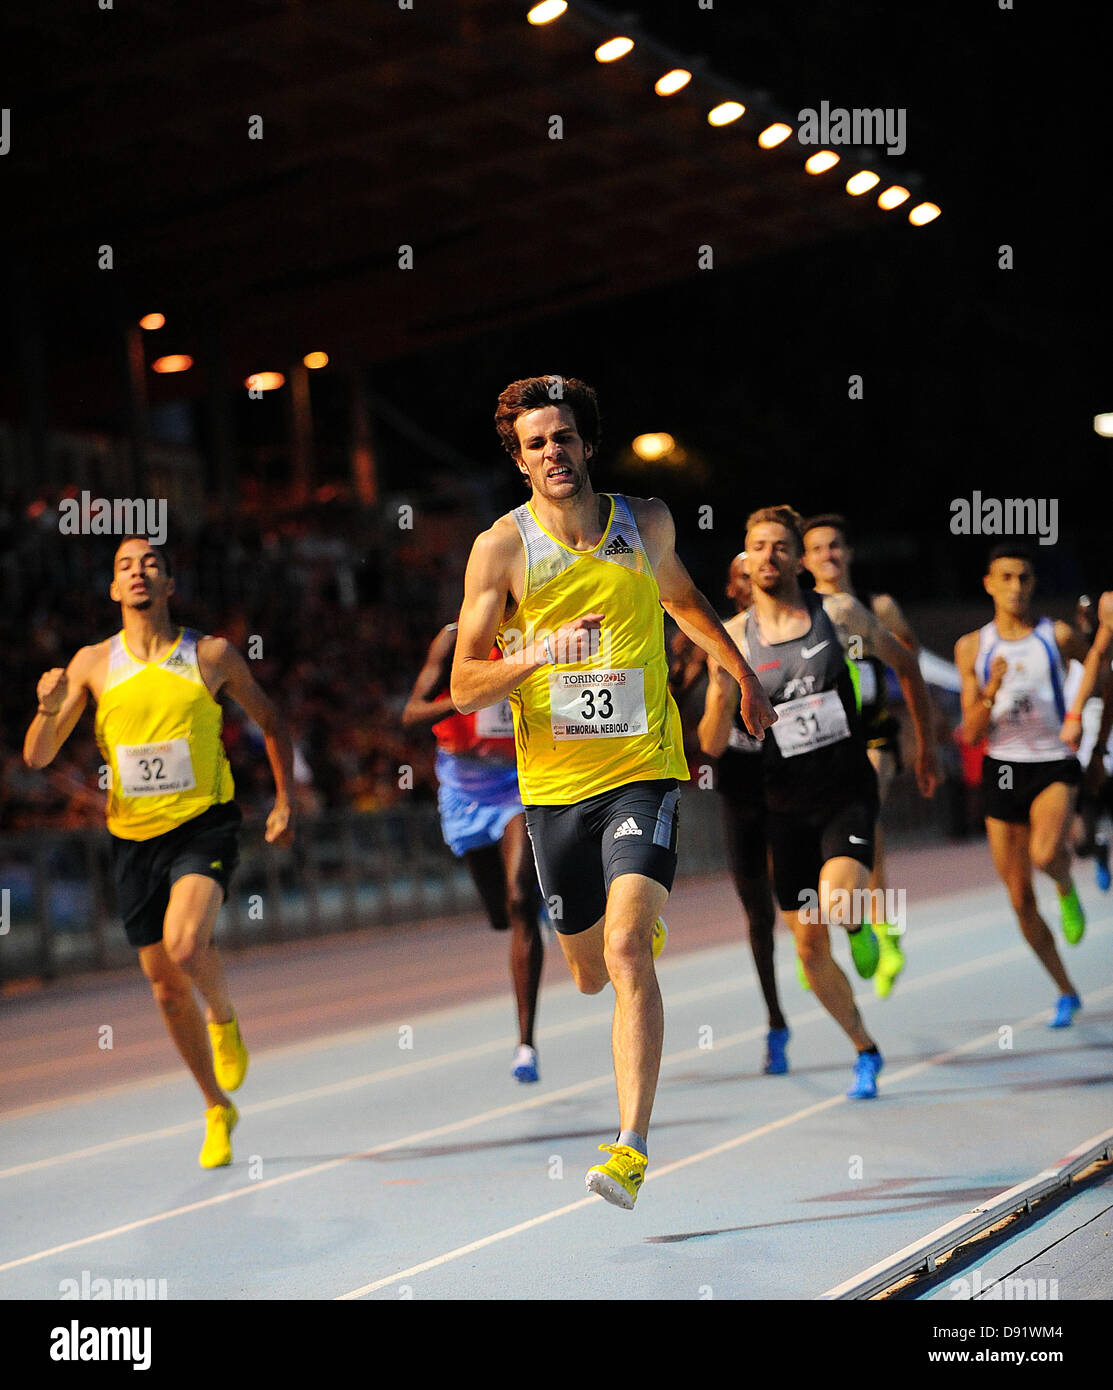 08.06.2013 Torino, Italy. Paul Renaudie of France wins the Mens 800m before Oualich Hamid of France during the International Athletics meeting Memorial Primo Nebiolo from the Stadio Primo Nebiolo. Stock Photo